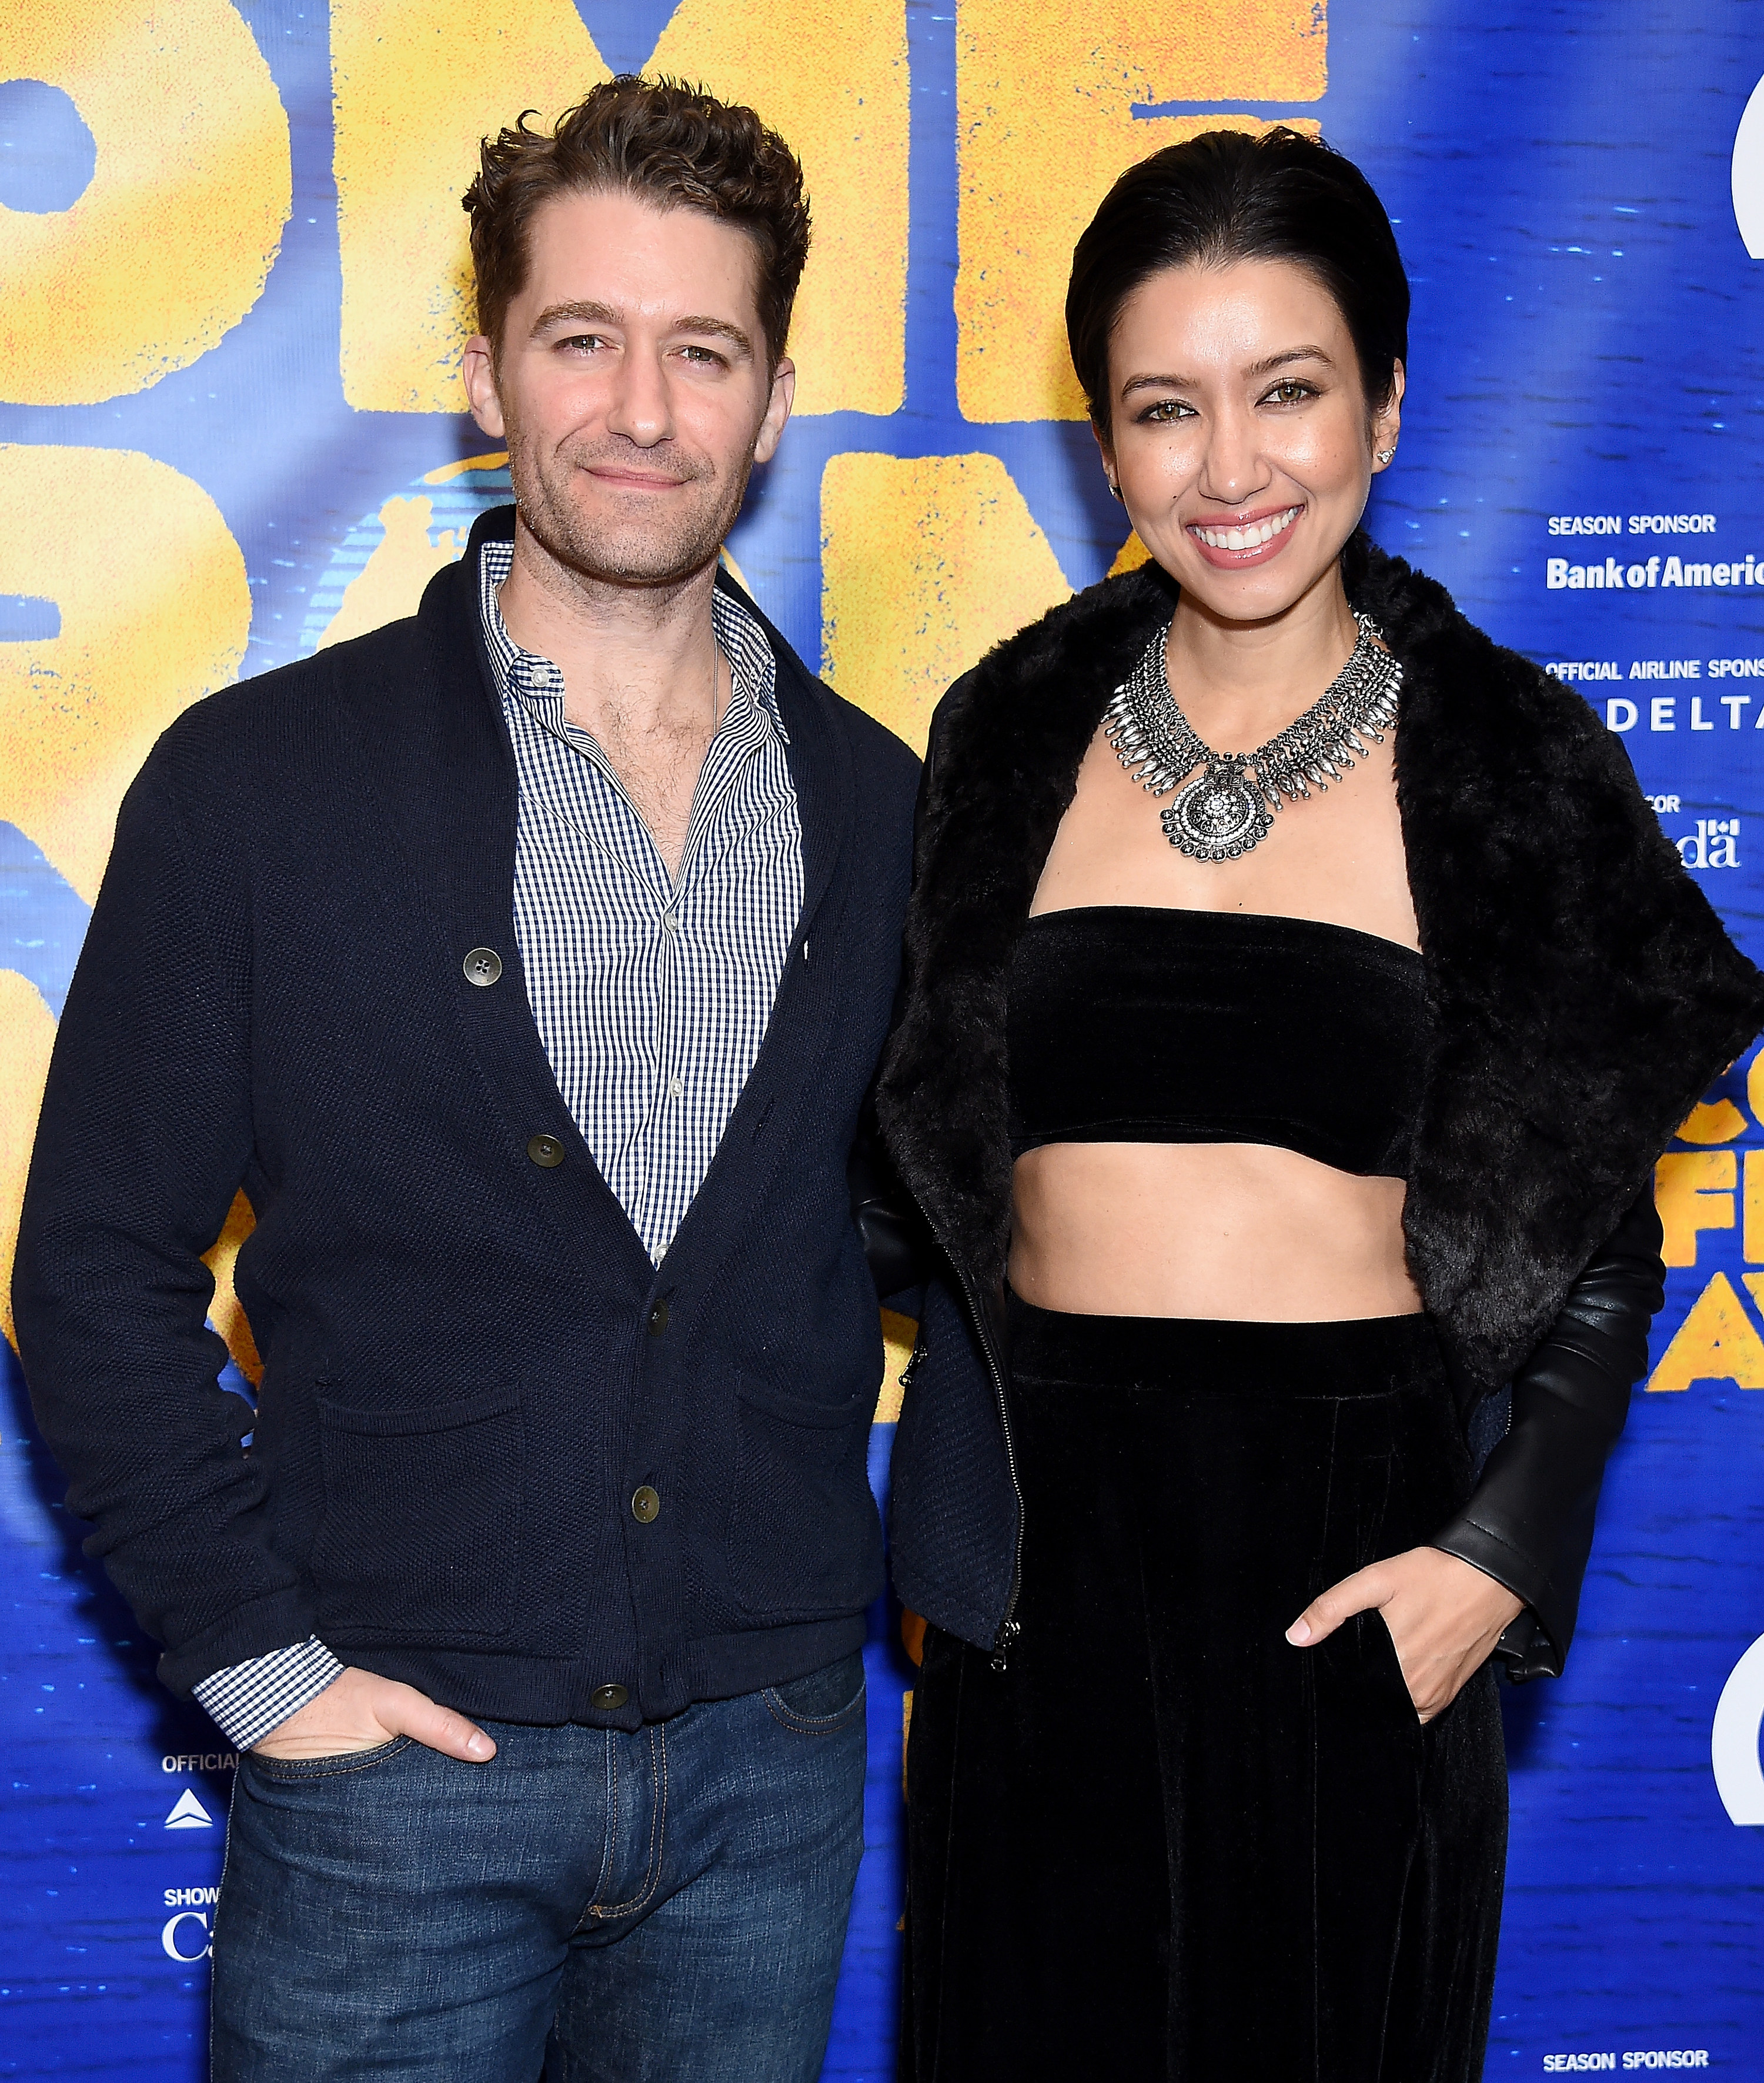 Matthew, in jeans and a sweater, and Renee, in a tube top and furry jacket, smiling on the red carpet